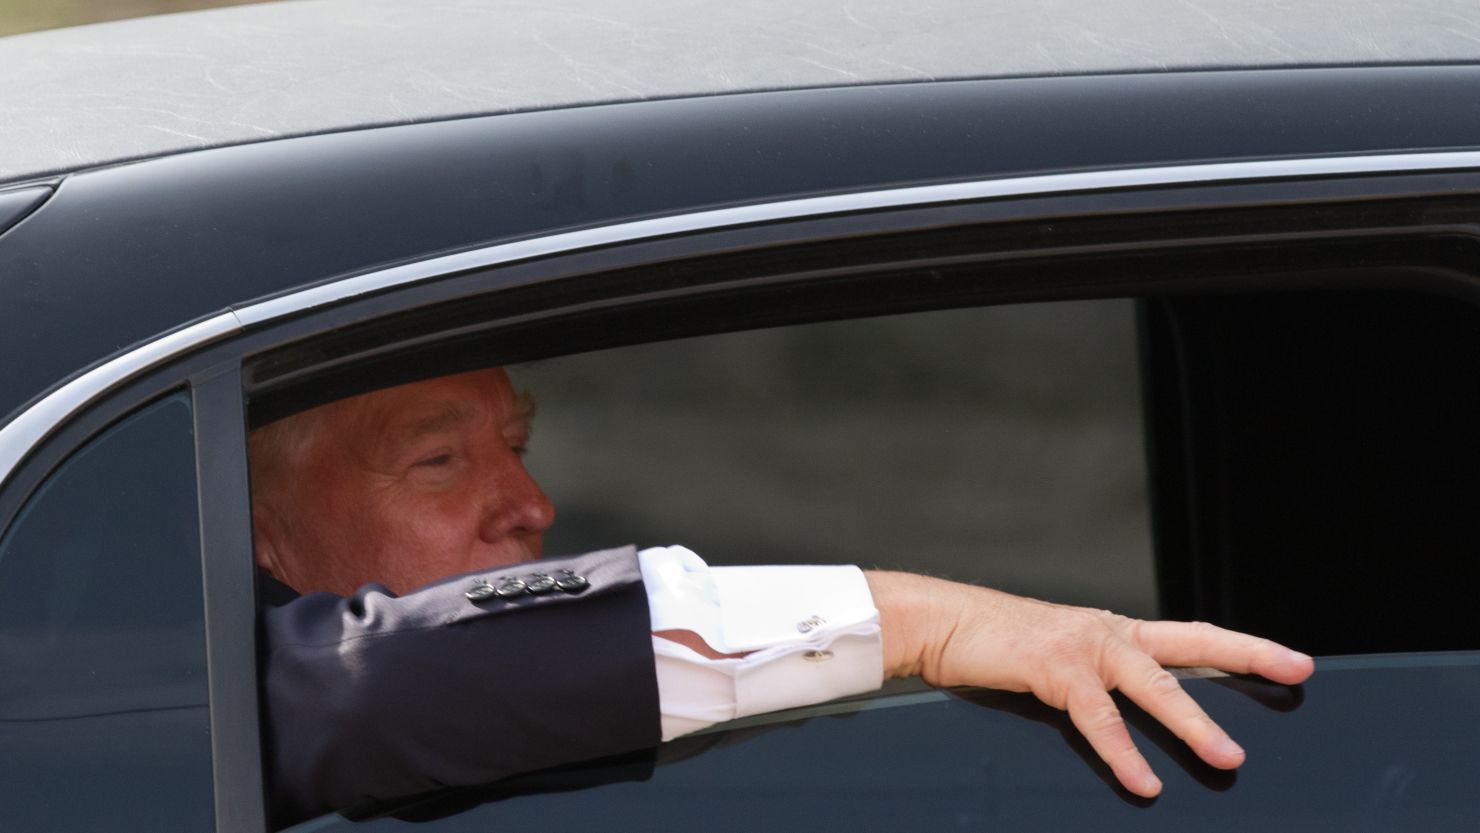 Donald Trump looks out the window of his limousine after visiting Newick's Lobster House on April 27, 2011 in Dover, New Hampshire.